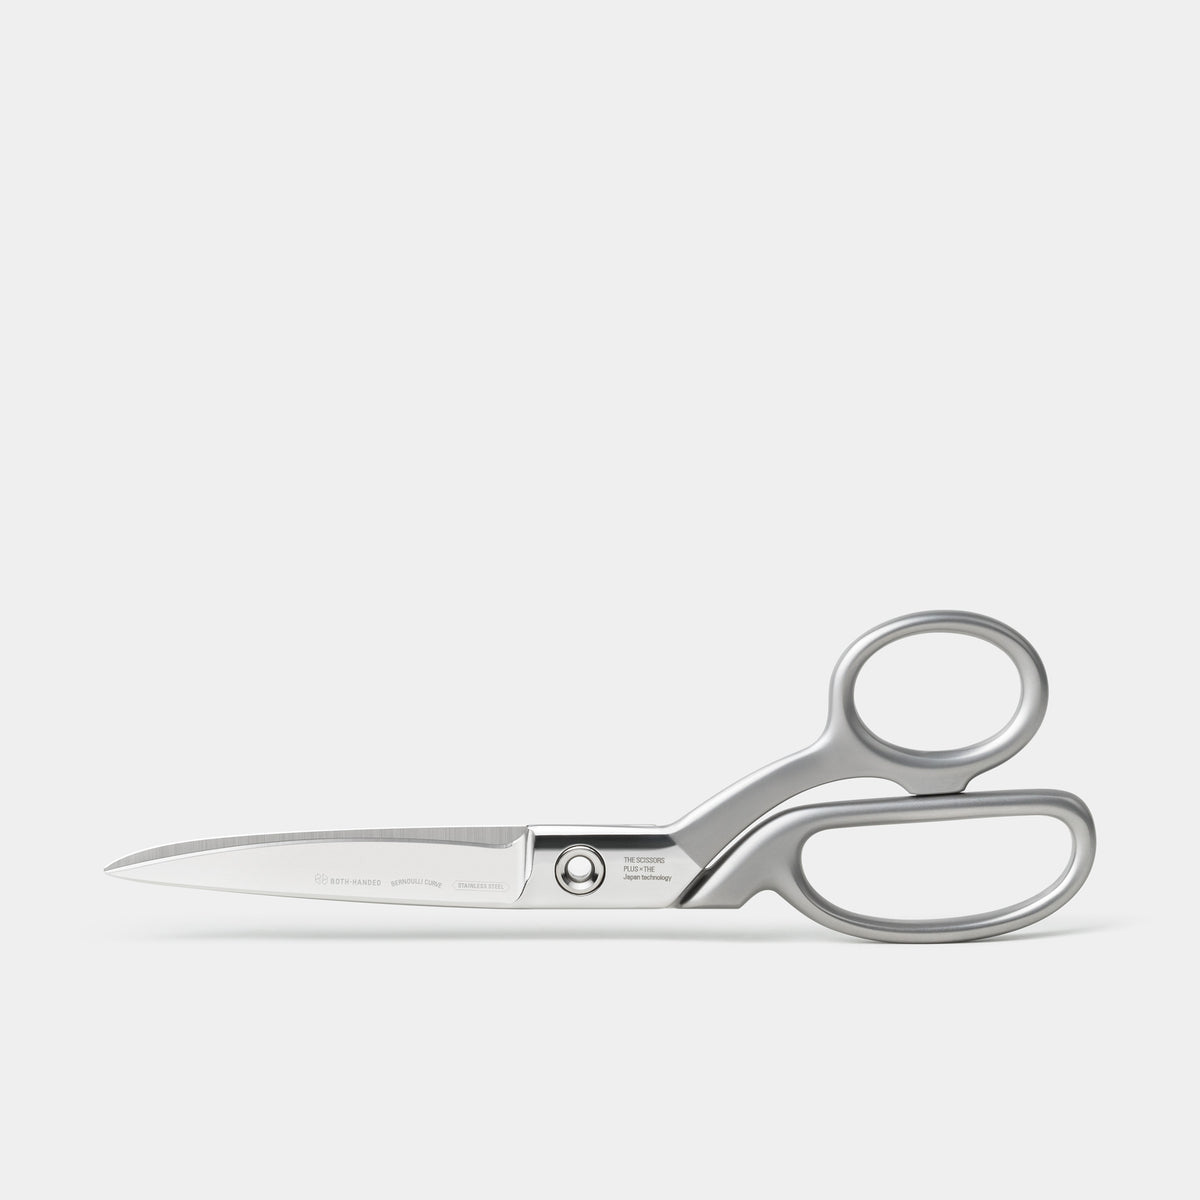 Buy Right Shears. Weird and funny stuff online - WeirdShitYouCanBuy